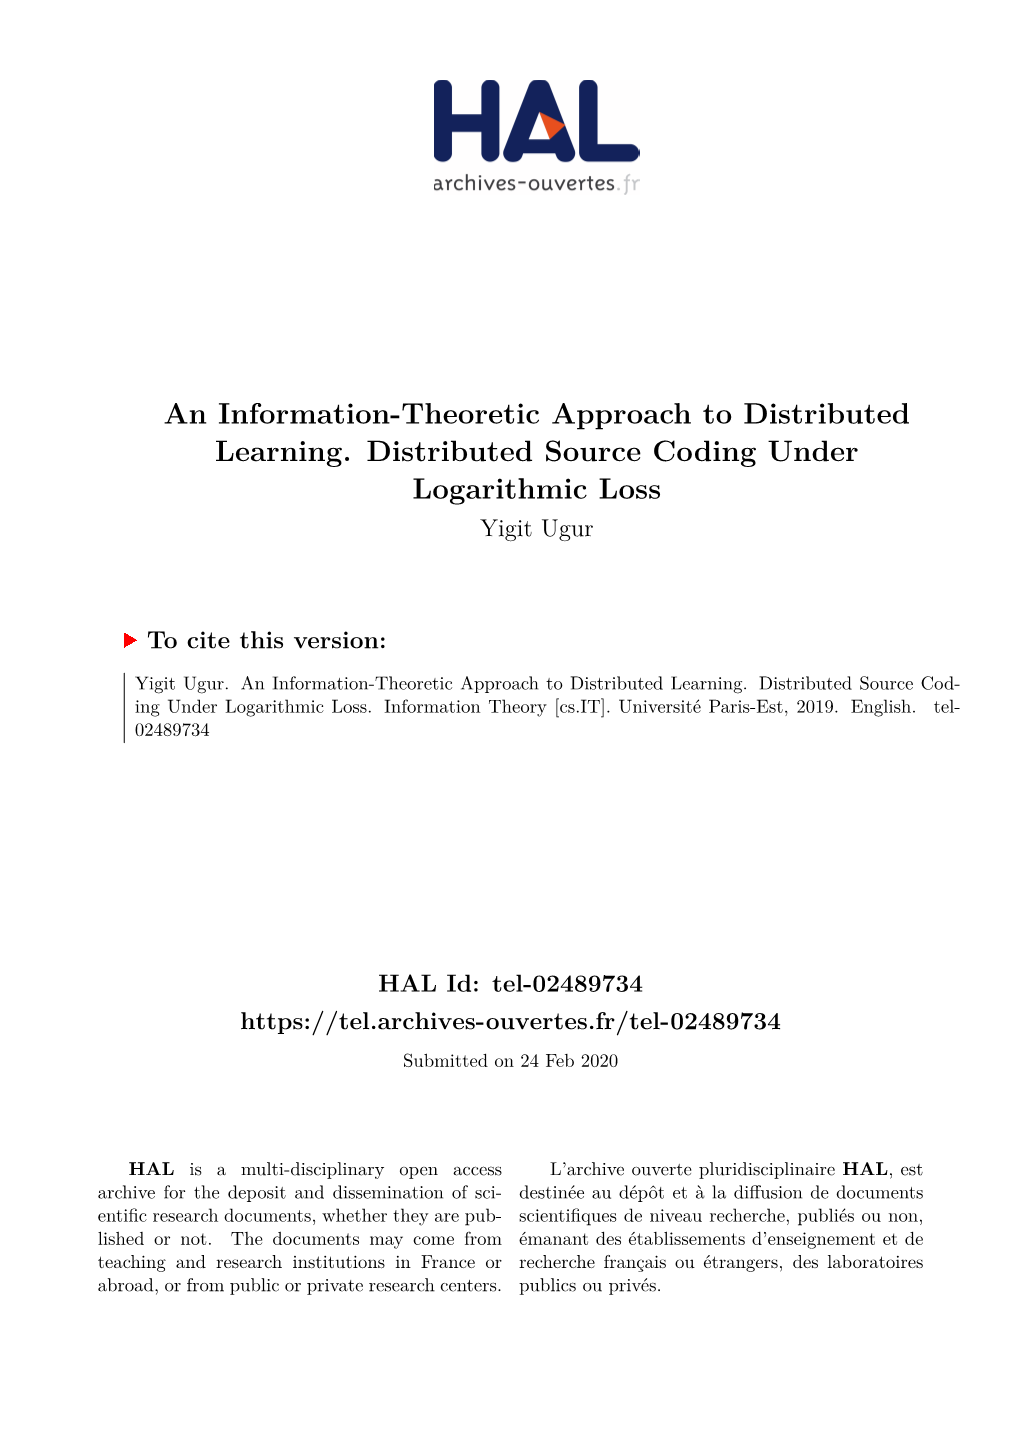 An Information-Theoretic Approach to Distributed Learning. Distributed Source Coding Under Logarithmic Loss Yigit Ugur